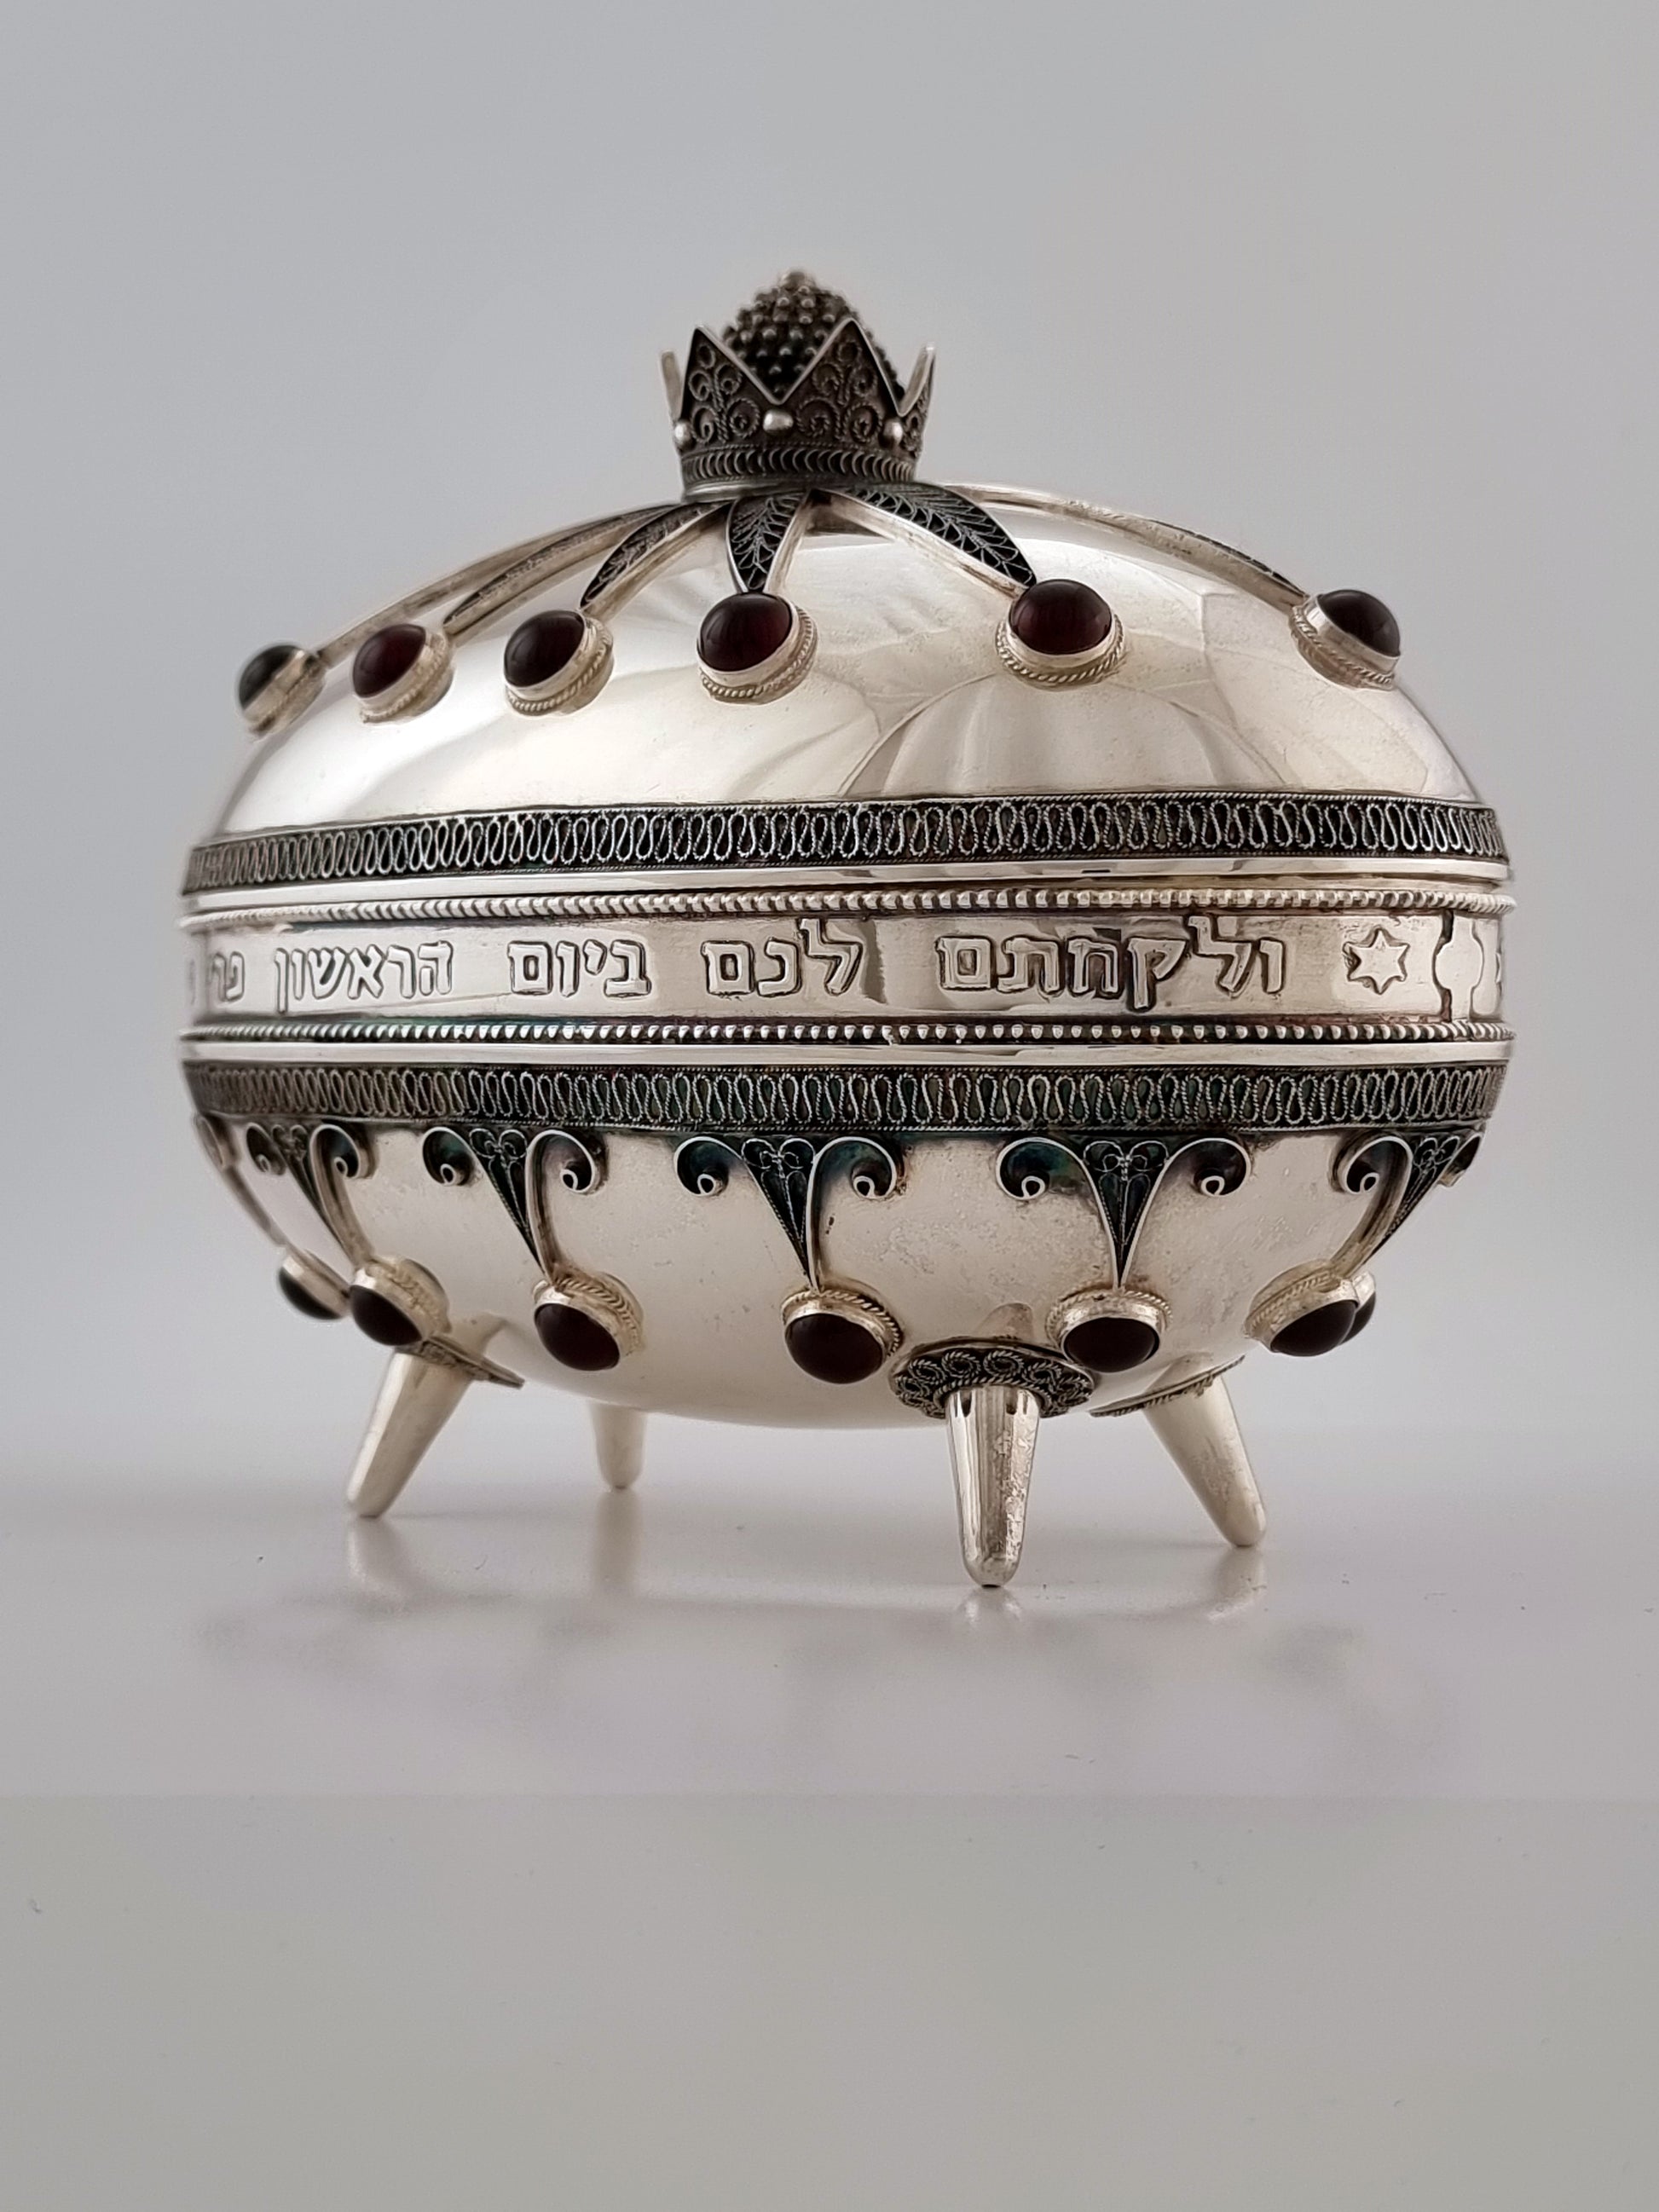 Isaiah Etrog Box. This signature piece was designed in 1950. The oval container measures 5½” in height and 6” in length and is made with sterling silver, red garnets and turquoise stones.